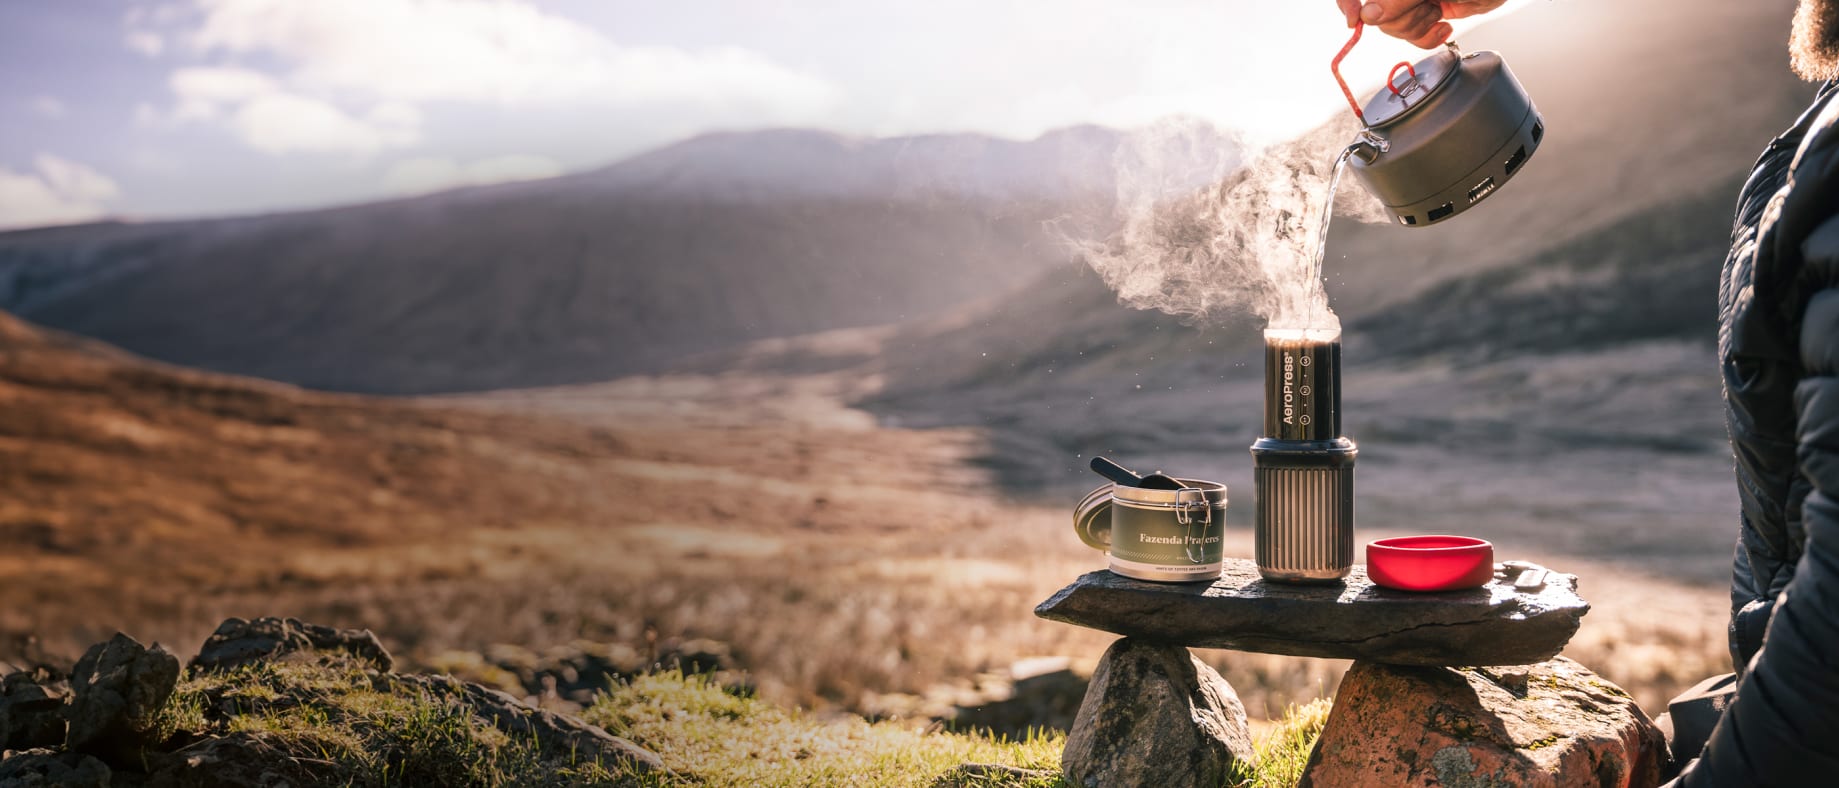 Everything you need for an ultimate coffee experience in the wild.